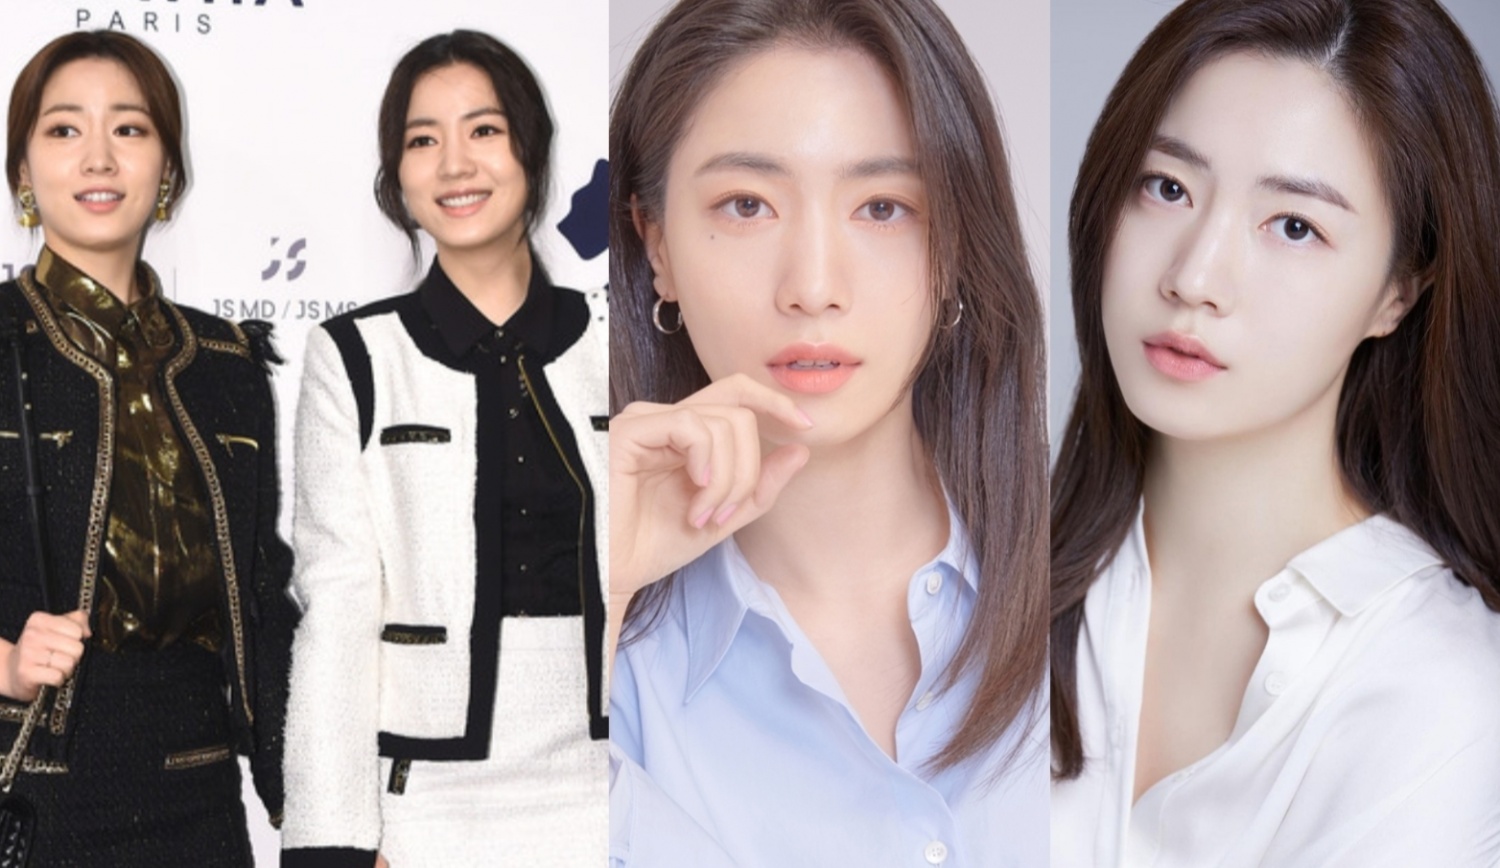 Where Are Hwayoung & Hyoyoung Now? Status of 'Ryu Twins' After T-ara Bullying Scandal